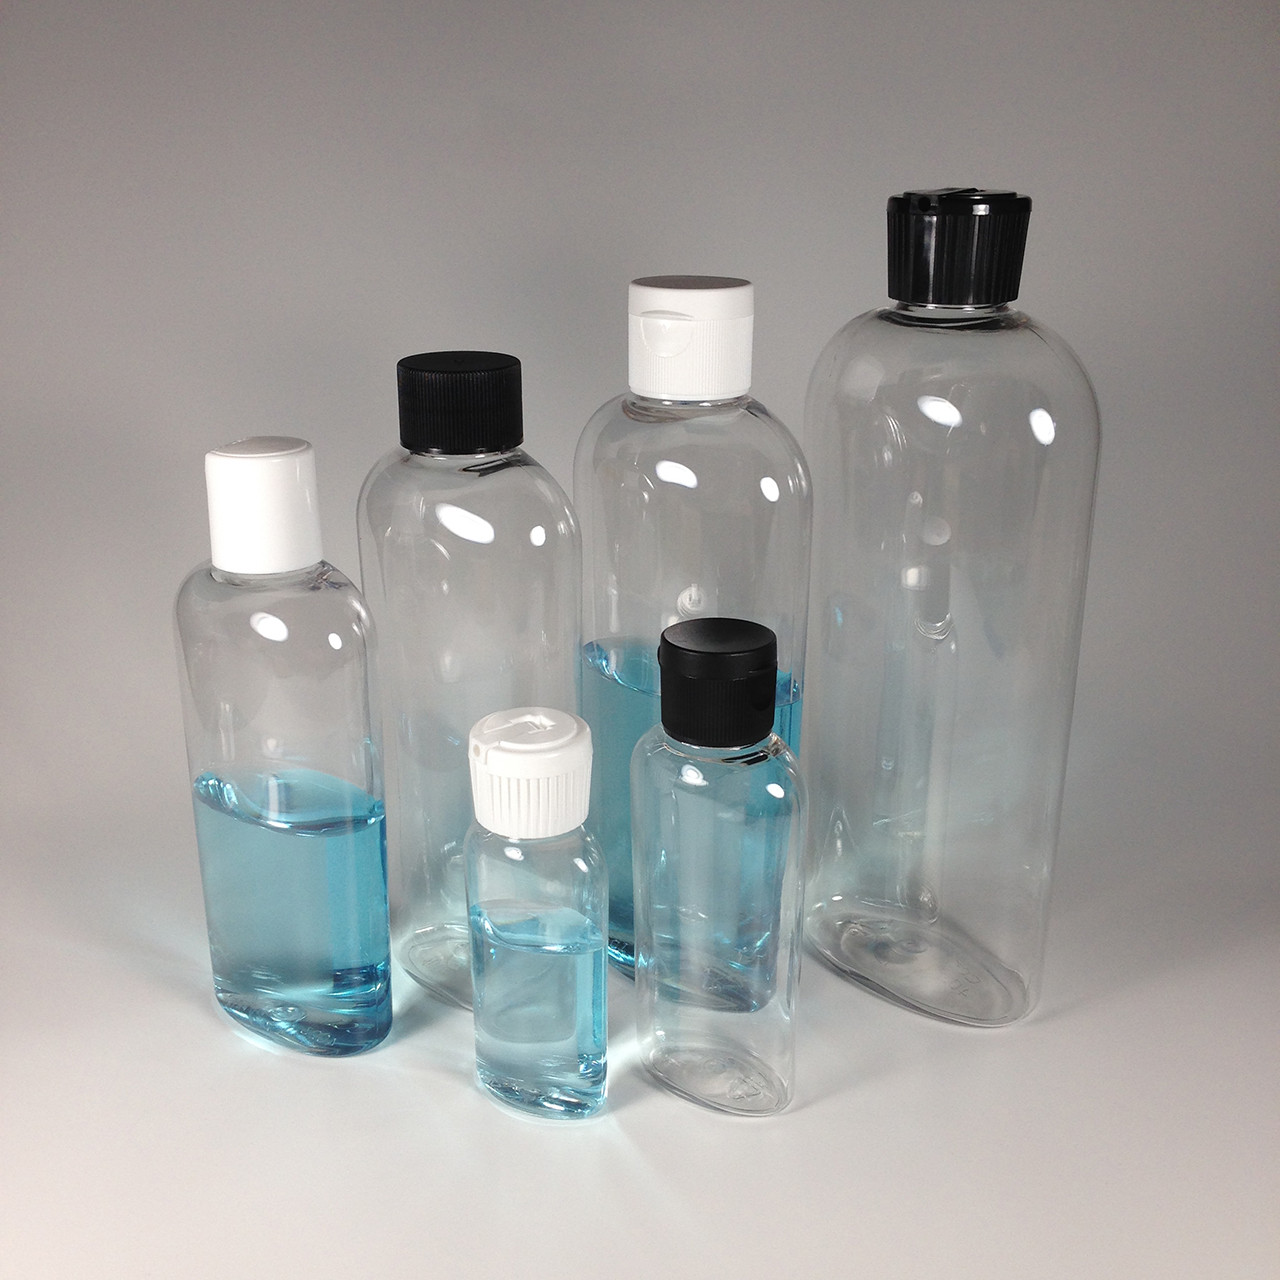 15 Pack Small Swing Top Glass Bottles with Lids, 2 oz/ 60 ml with